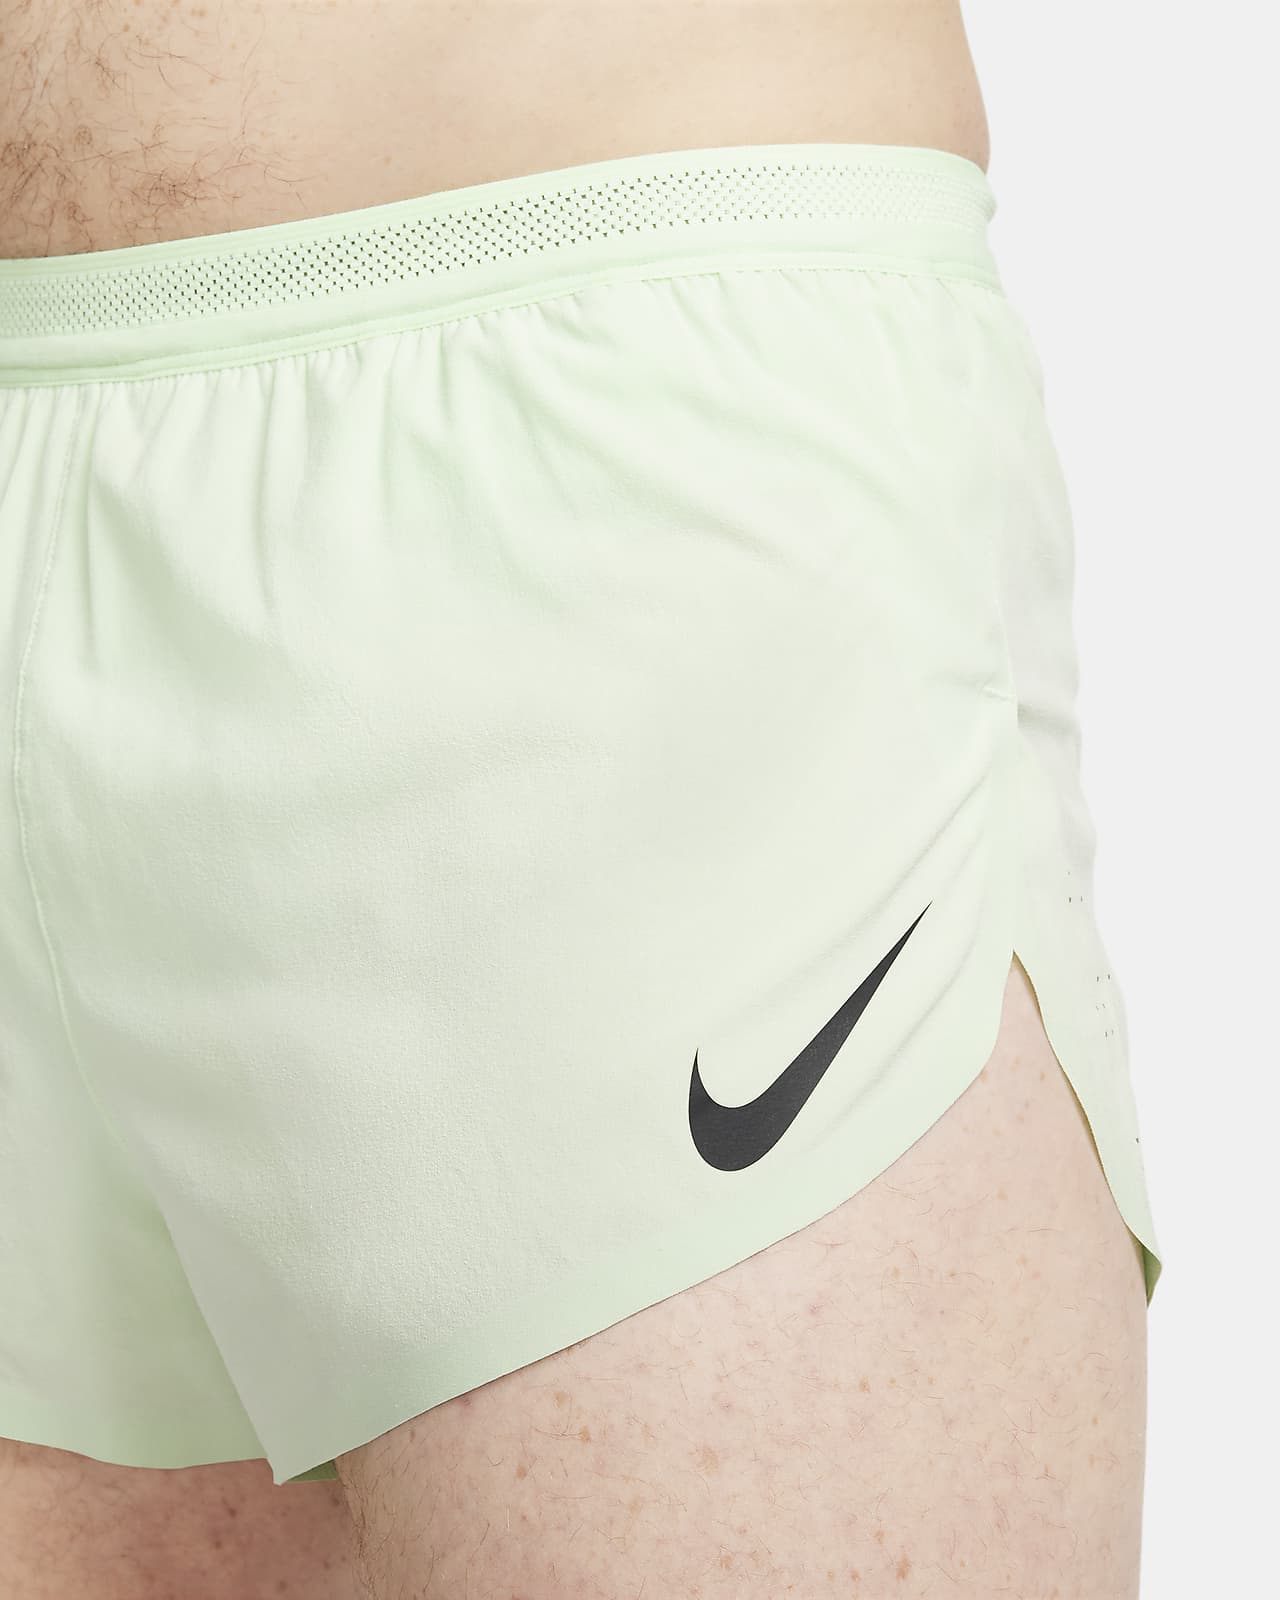 Stay stylish and comfortable with these Nike Aeroswift Shorts